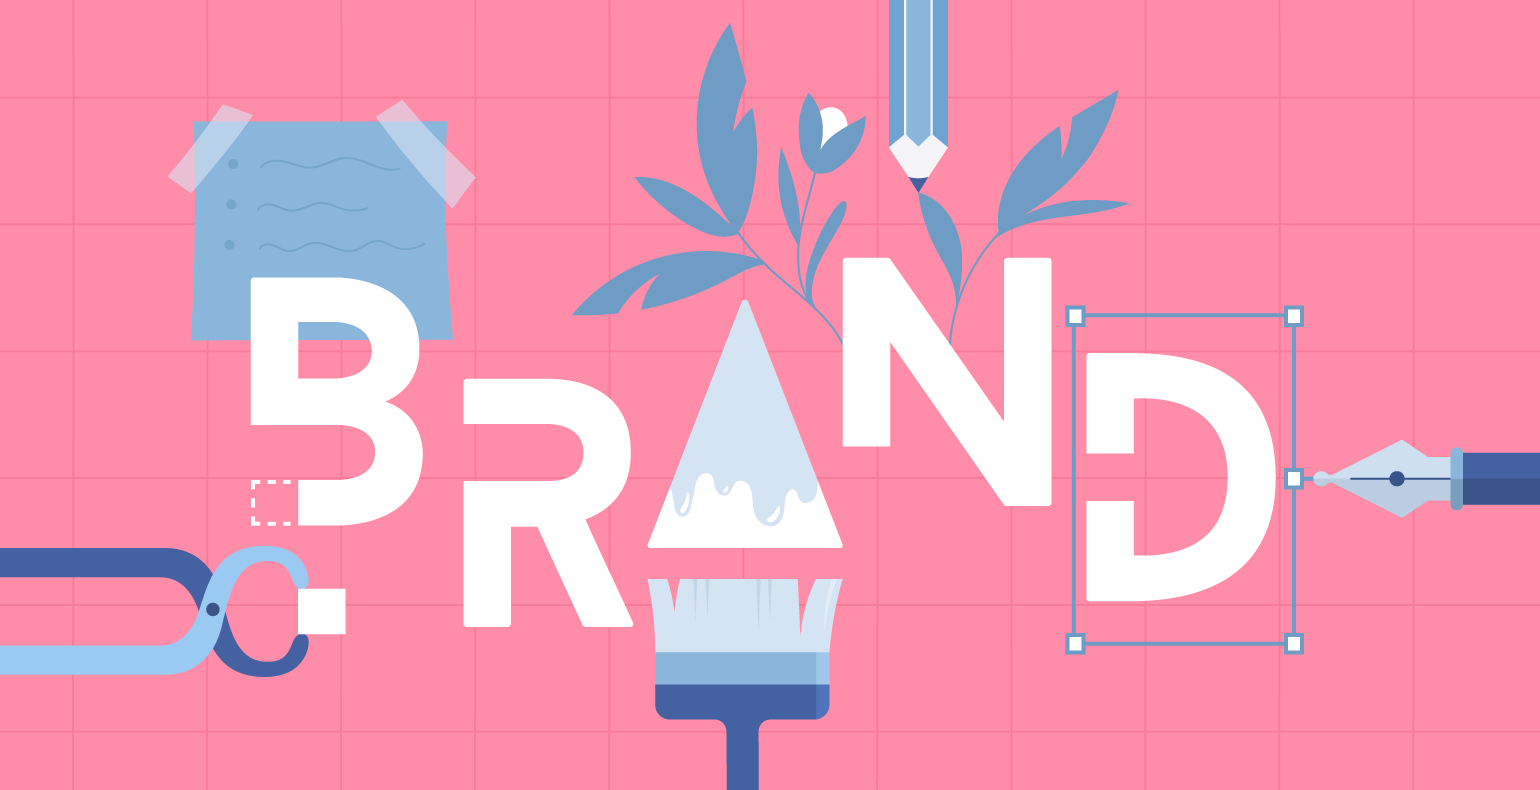 Brand identity: How to Create a Great One?